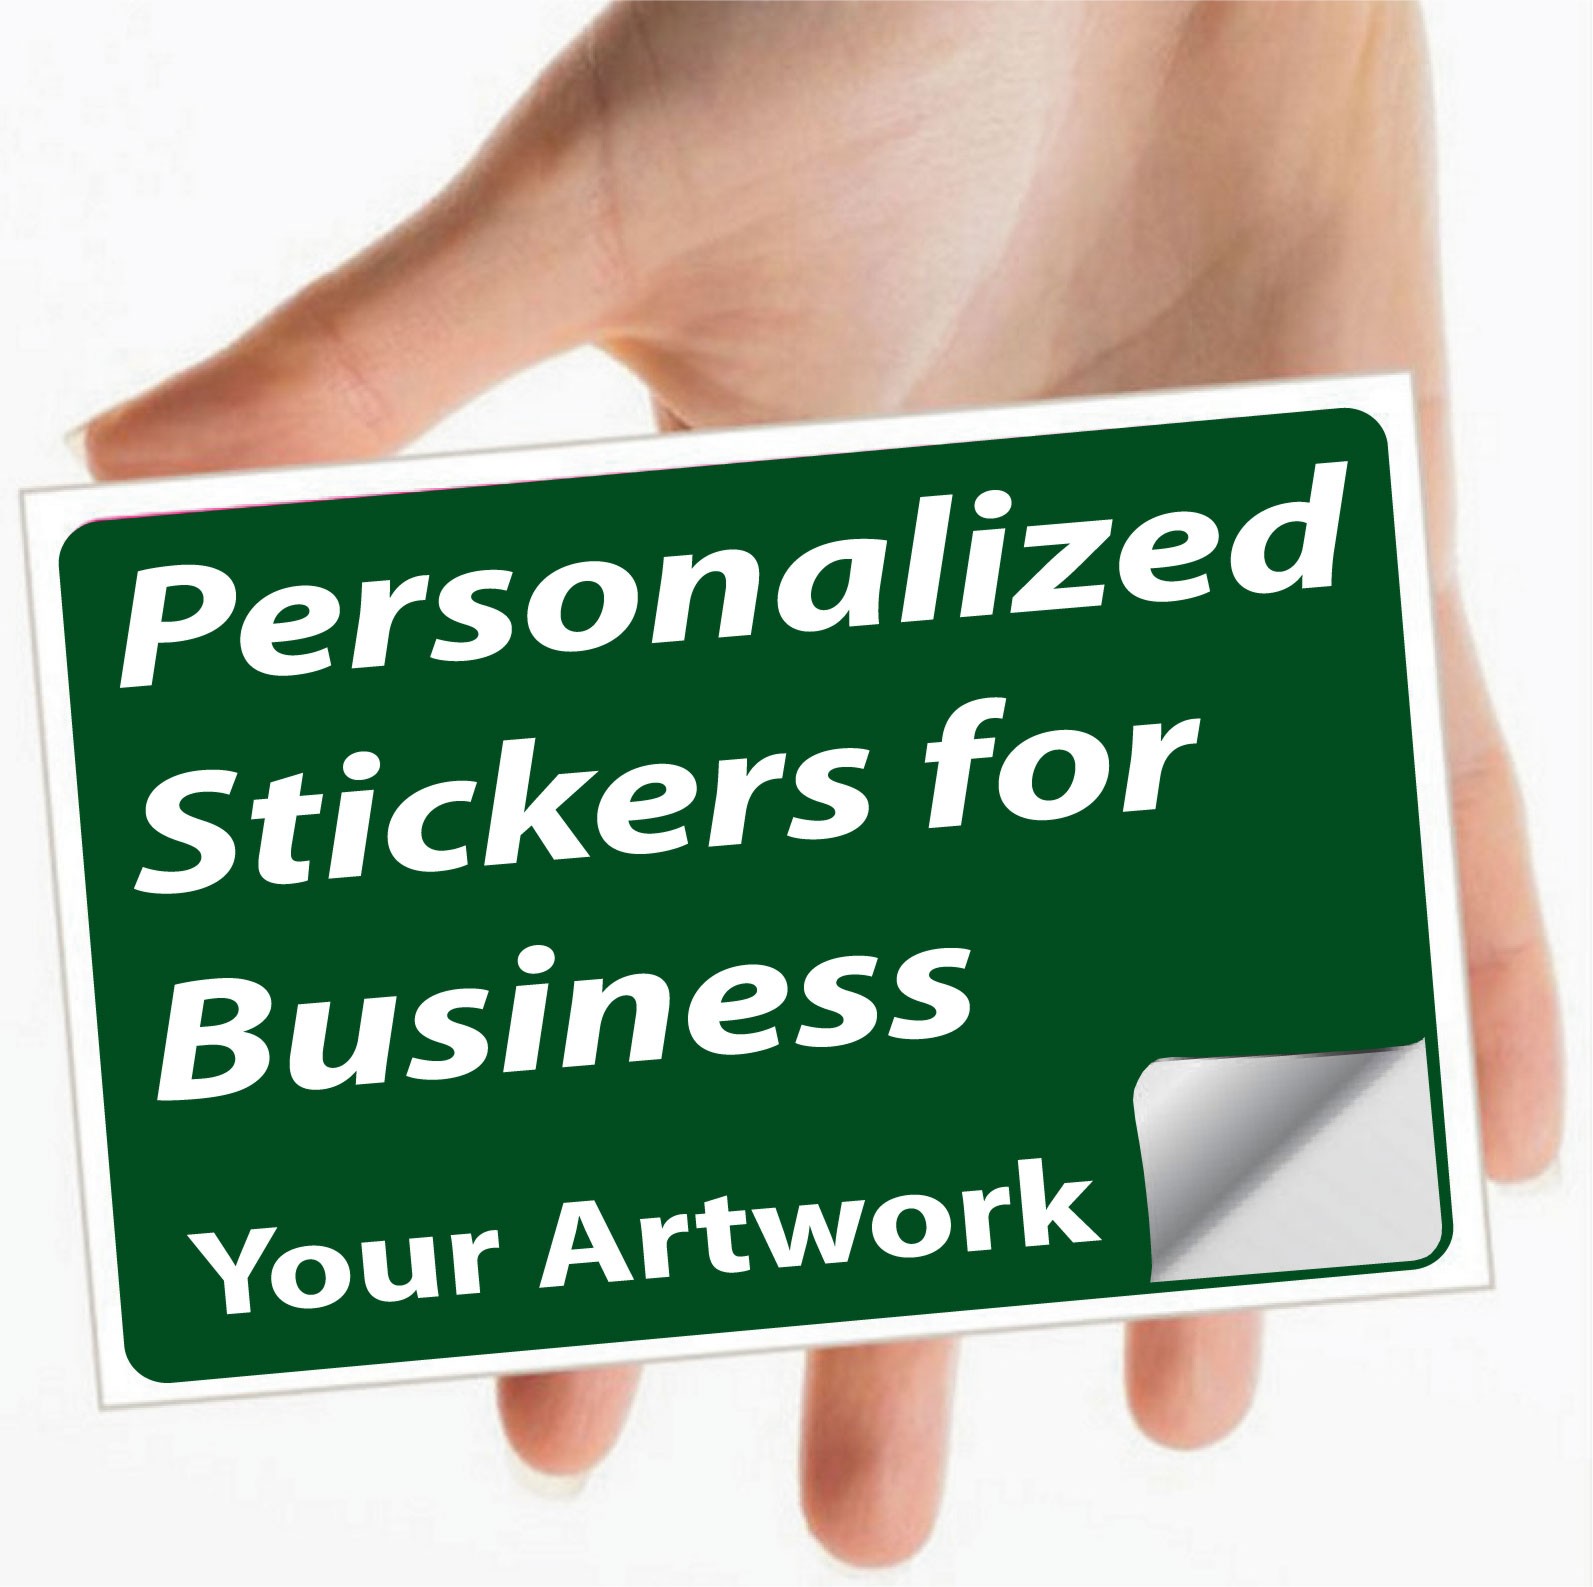 Personalized Stickers For Business UK